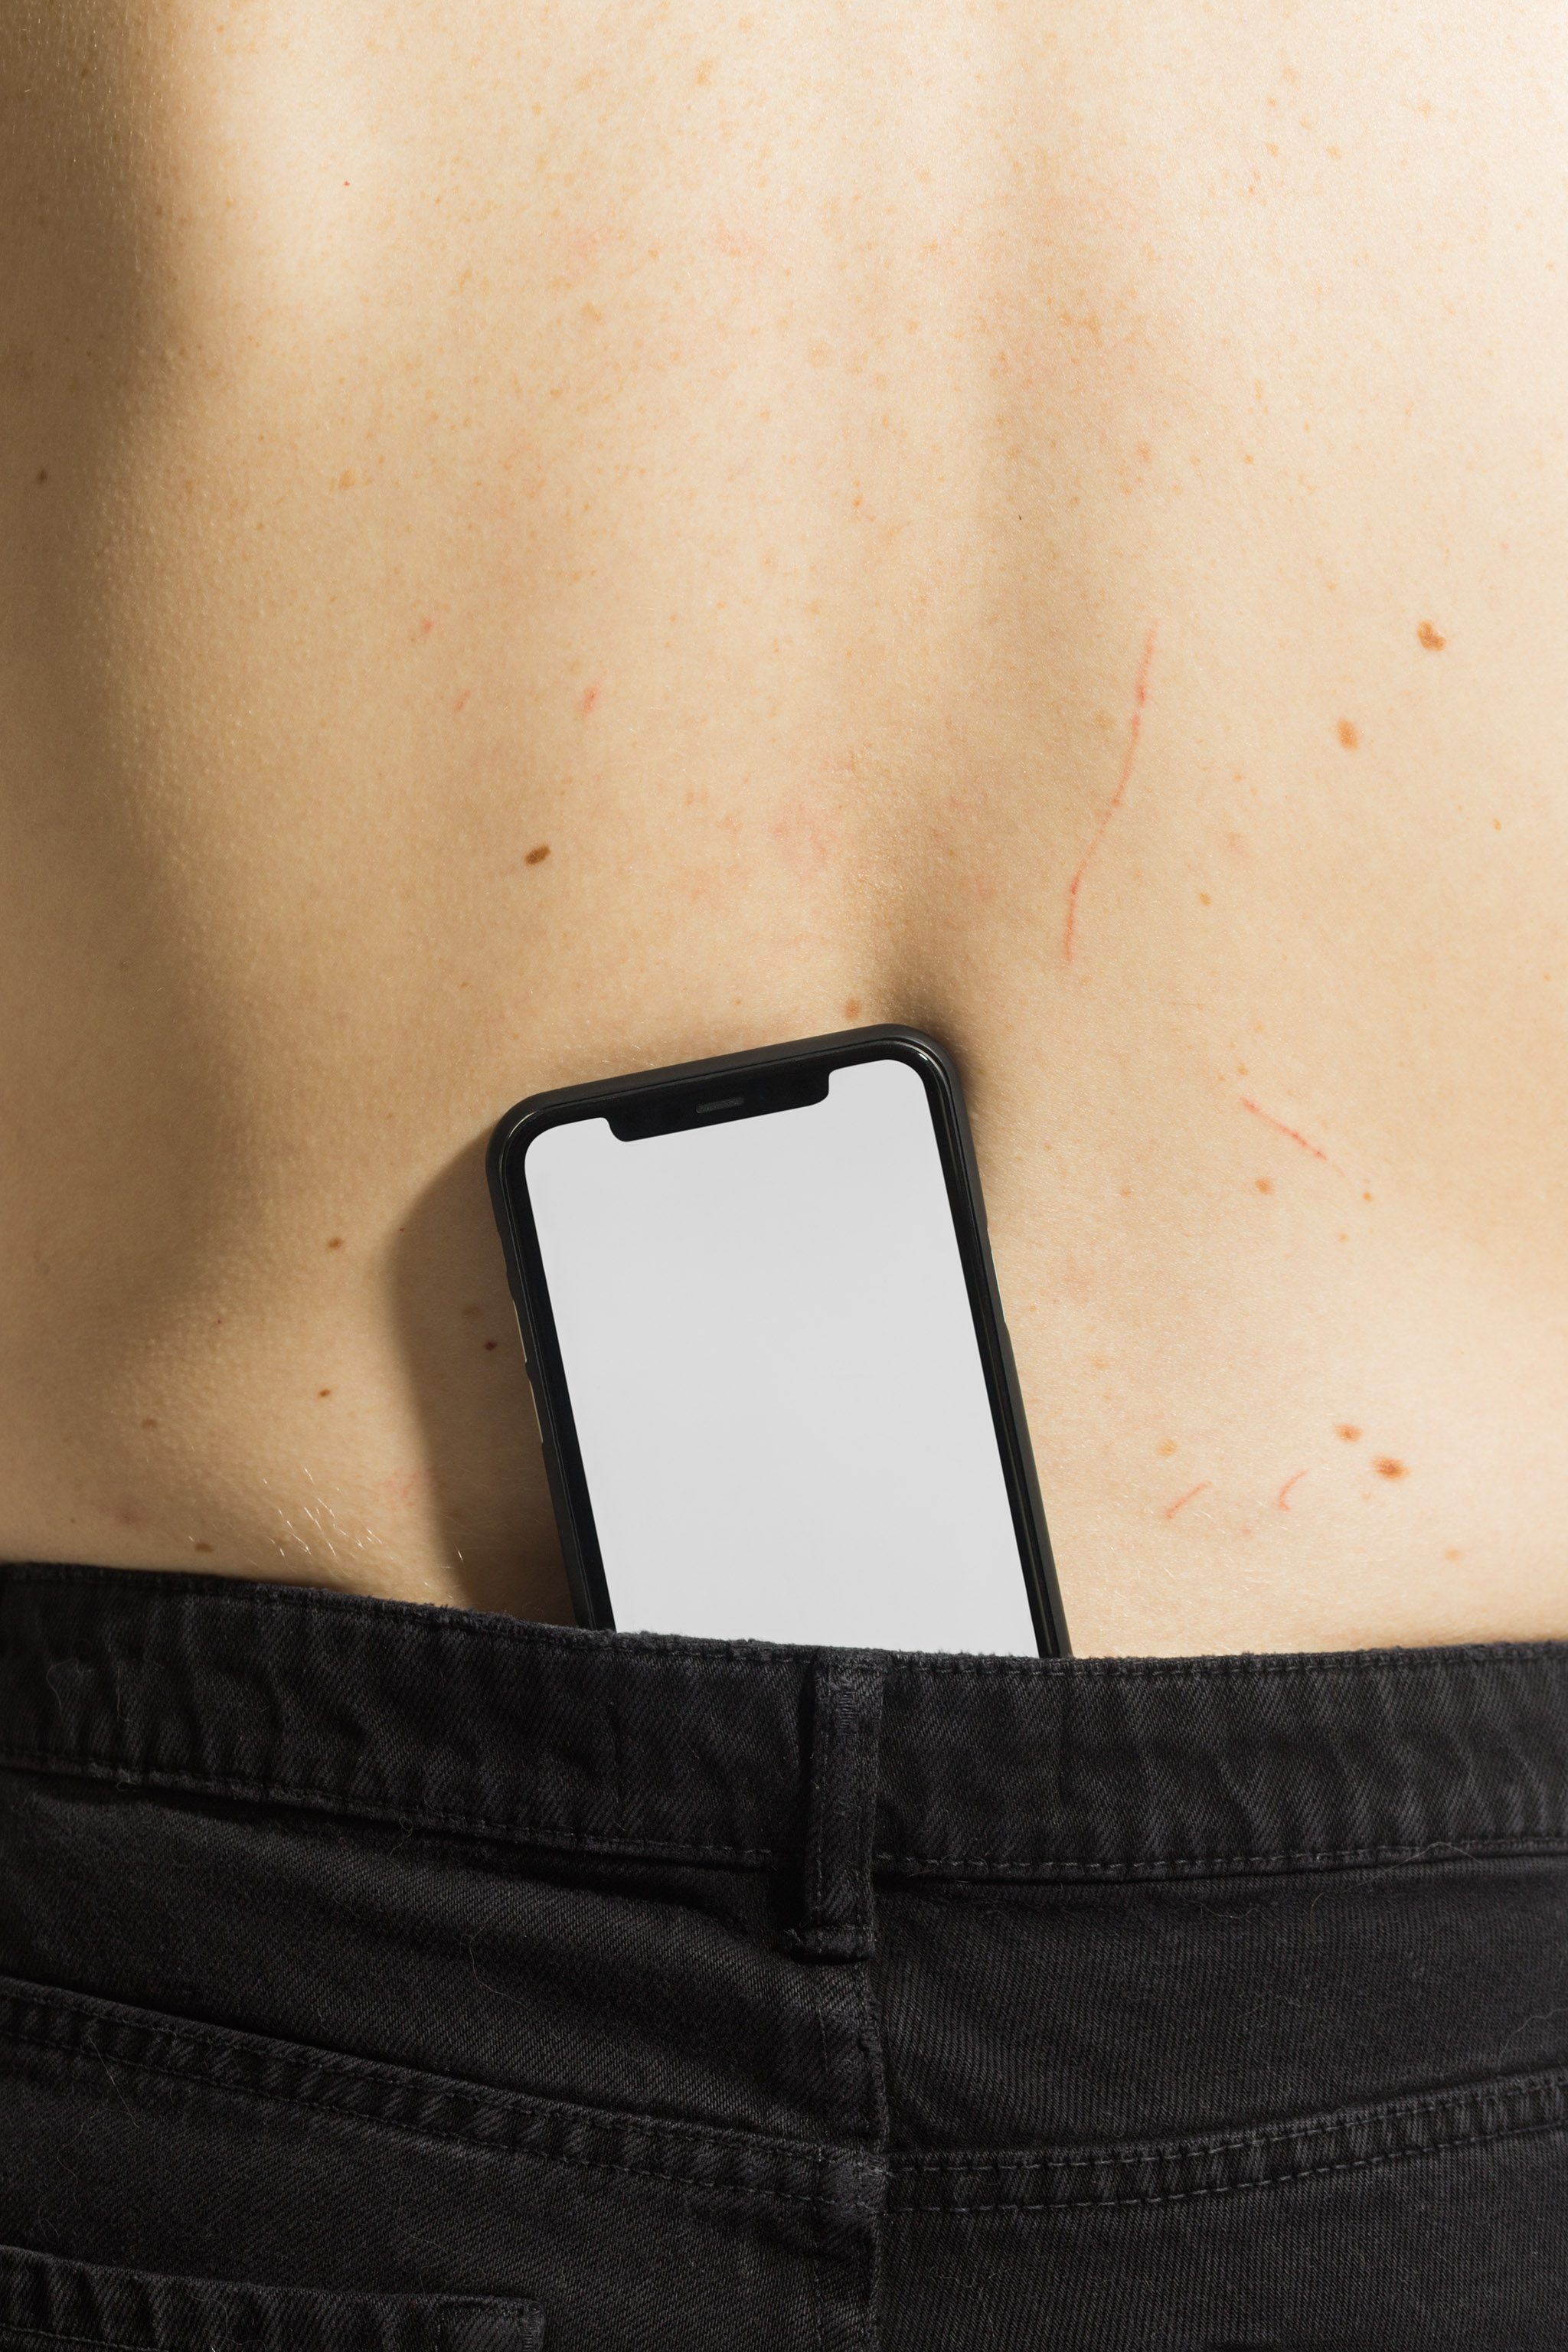 Close-up mockup of a black iPhone on bare skin tucked behind jeans, empty mockup.